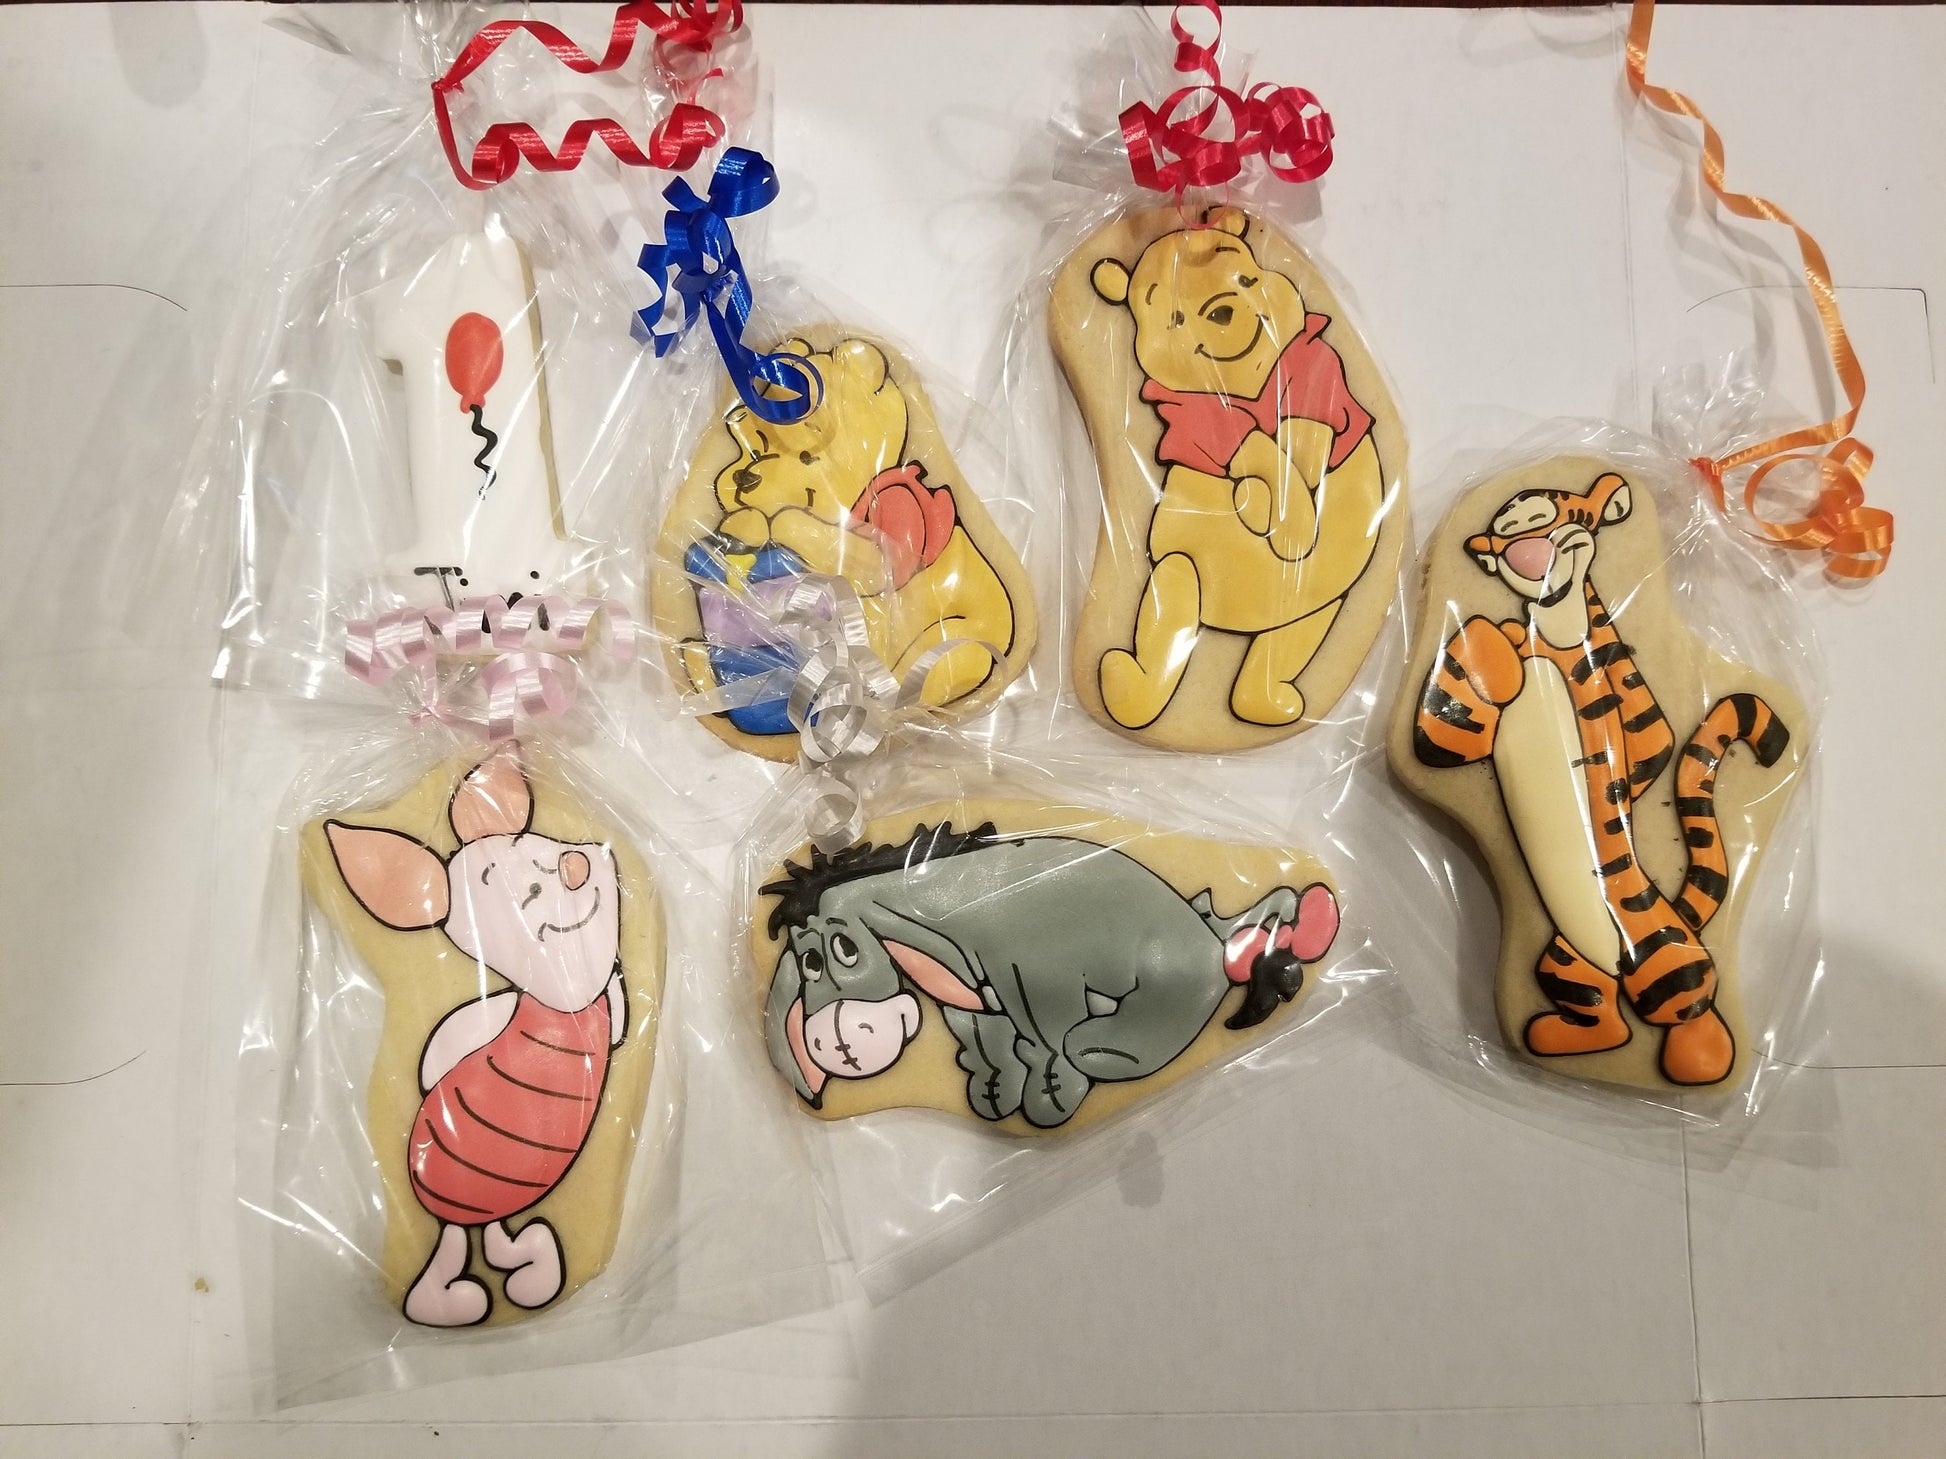 Pooh Cookies  (Inspired by Winnie the Pooh) One Dozen (12) - Ladybug bake shop